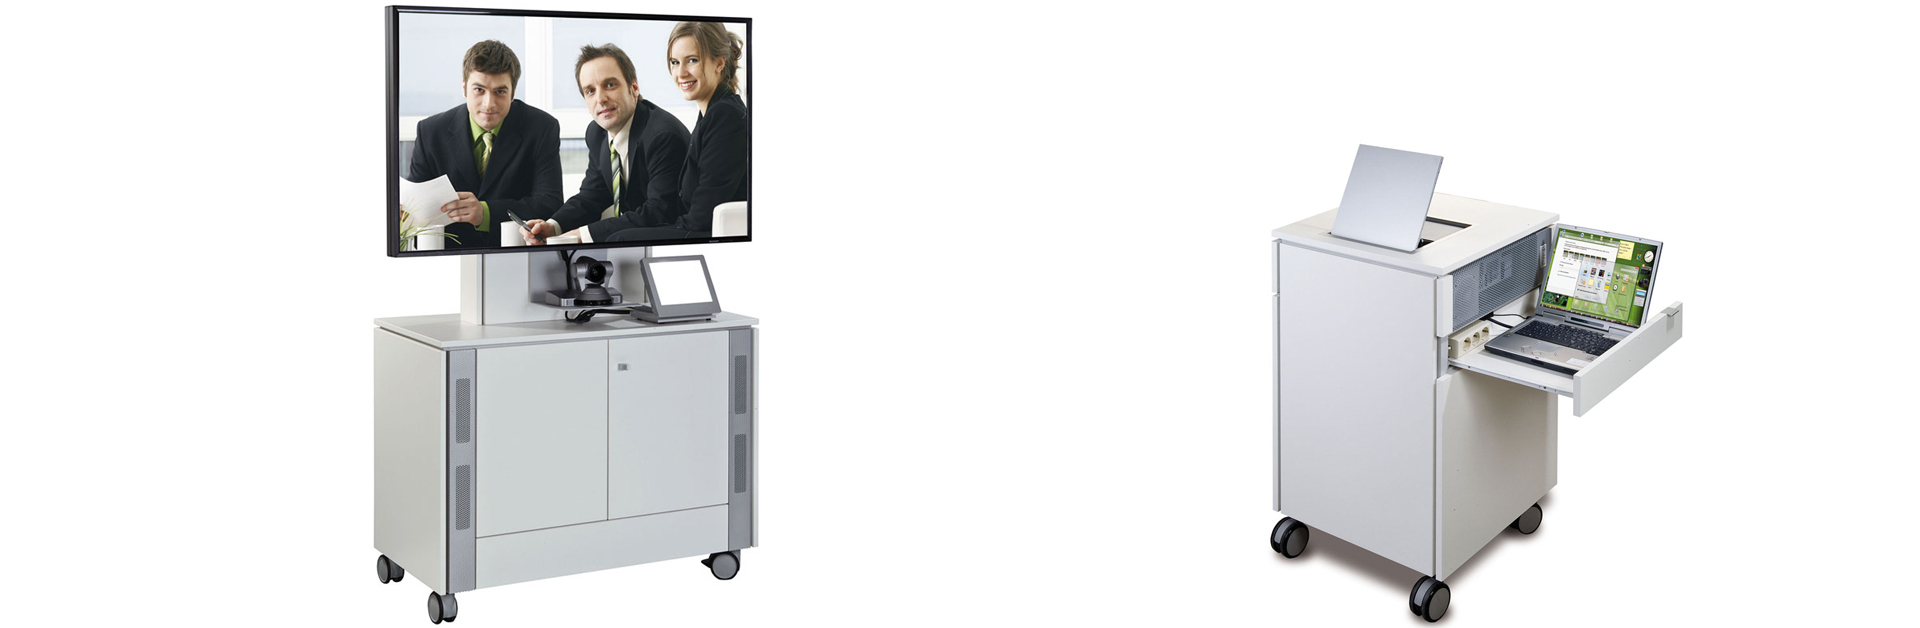 Header: Picture shows two media trolleys. One media trolley with display and video conference module, one media trolley with projector and notebook.